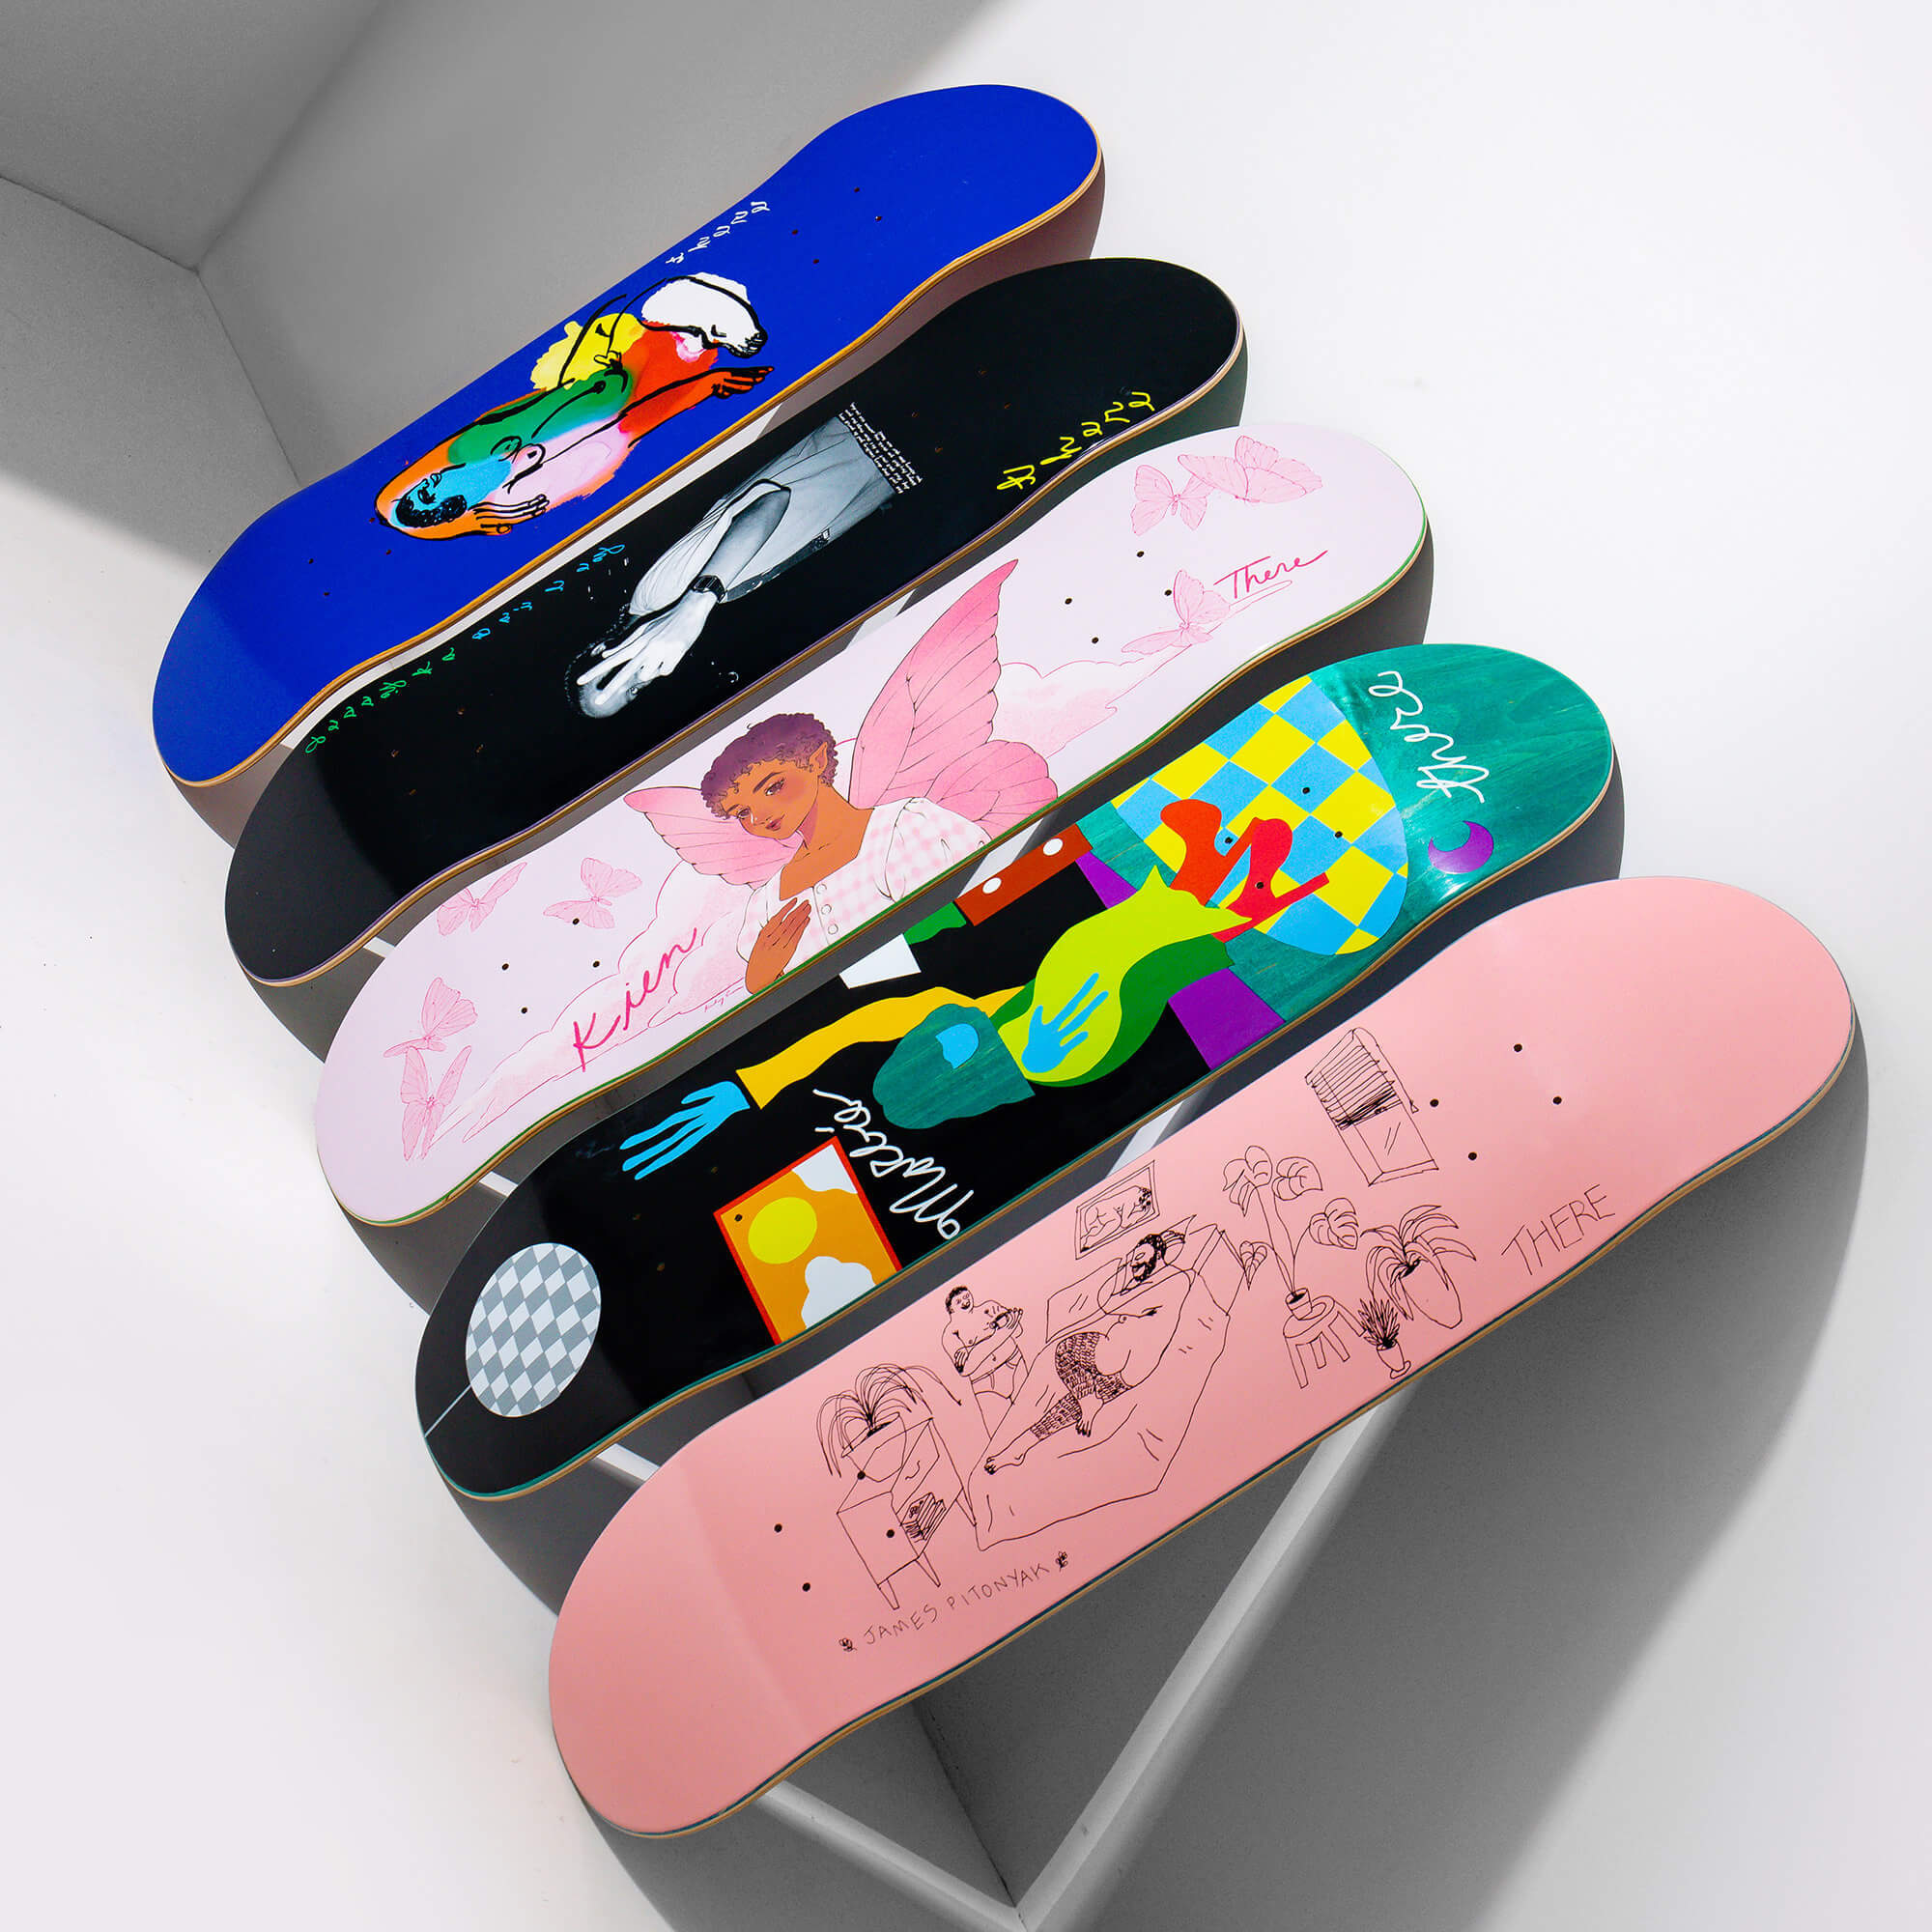 There Skateboards - Championing inclusivity in skateboarding